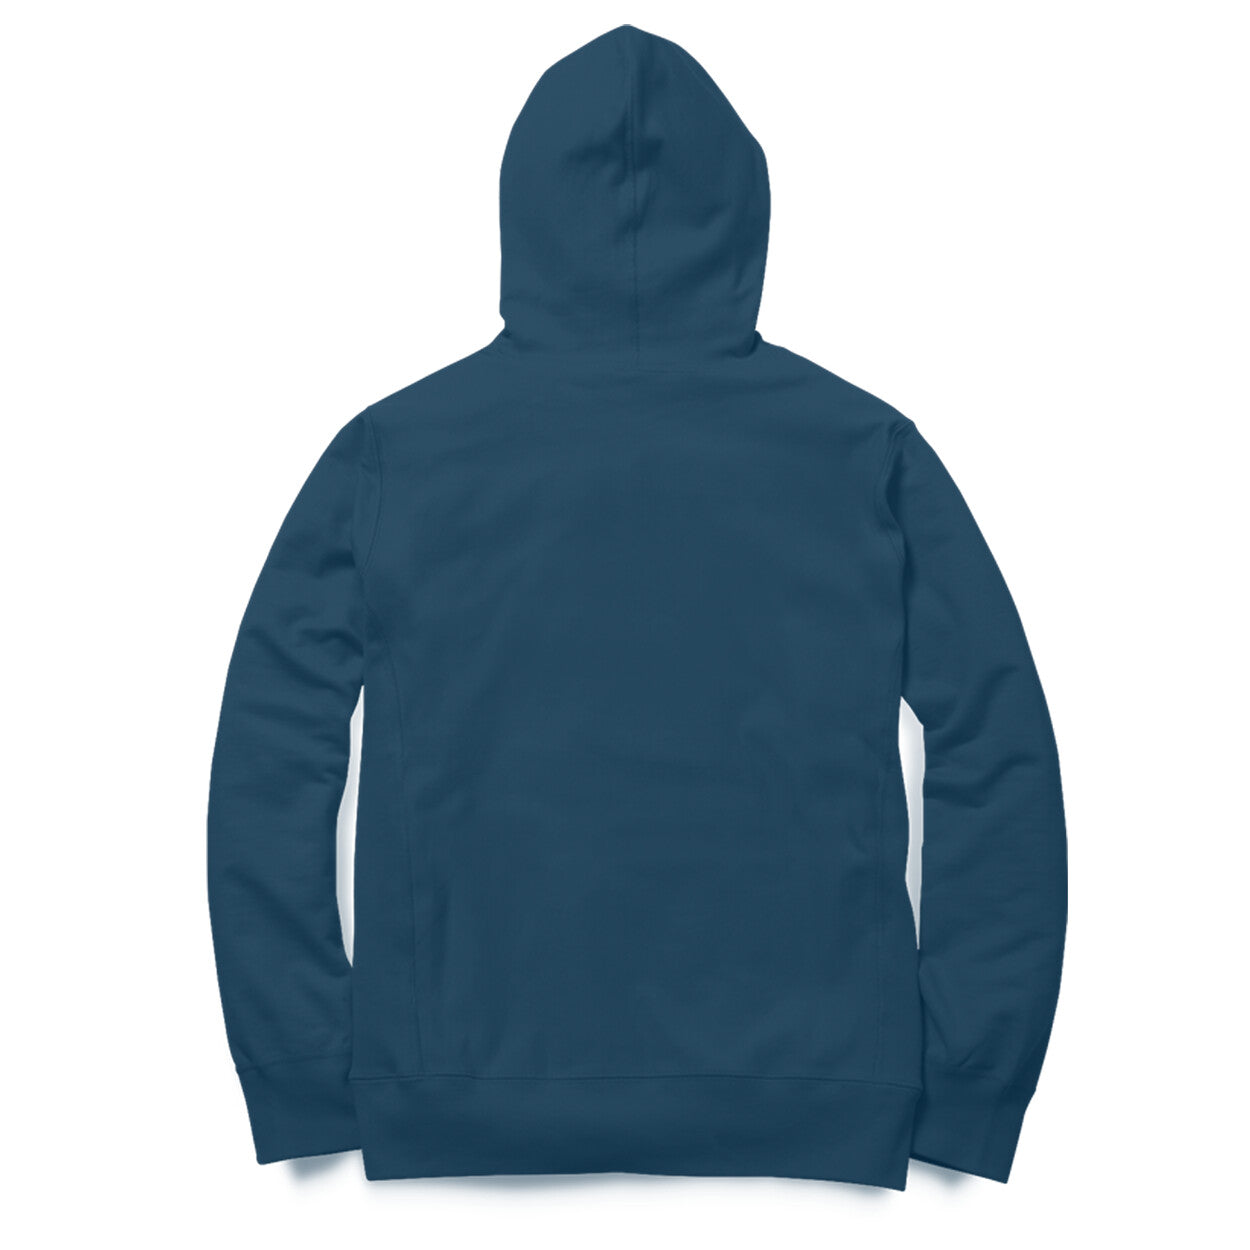 Chase Your Dreams - Navy Blue Unisex Hoodie